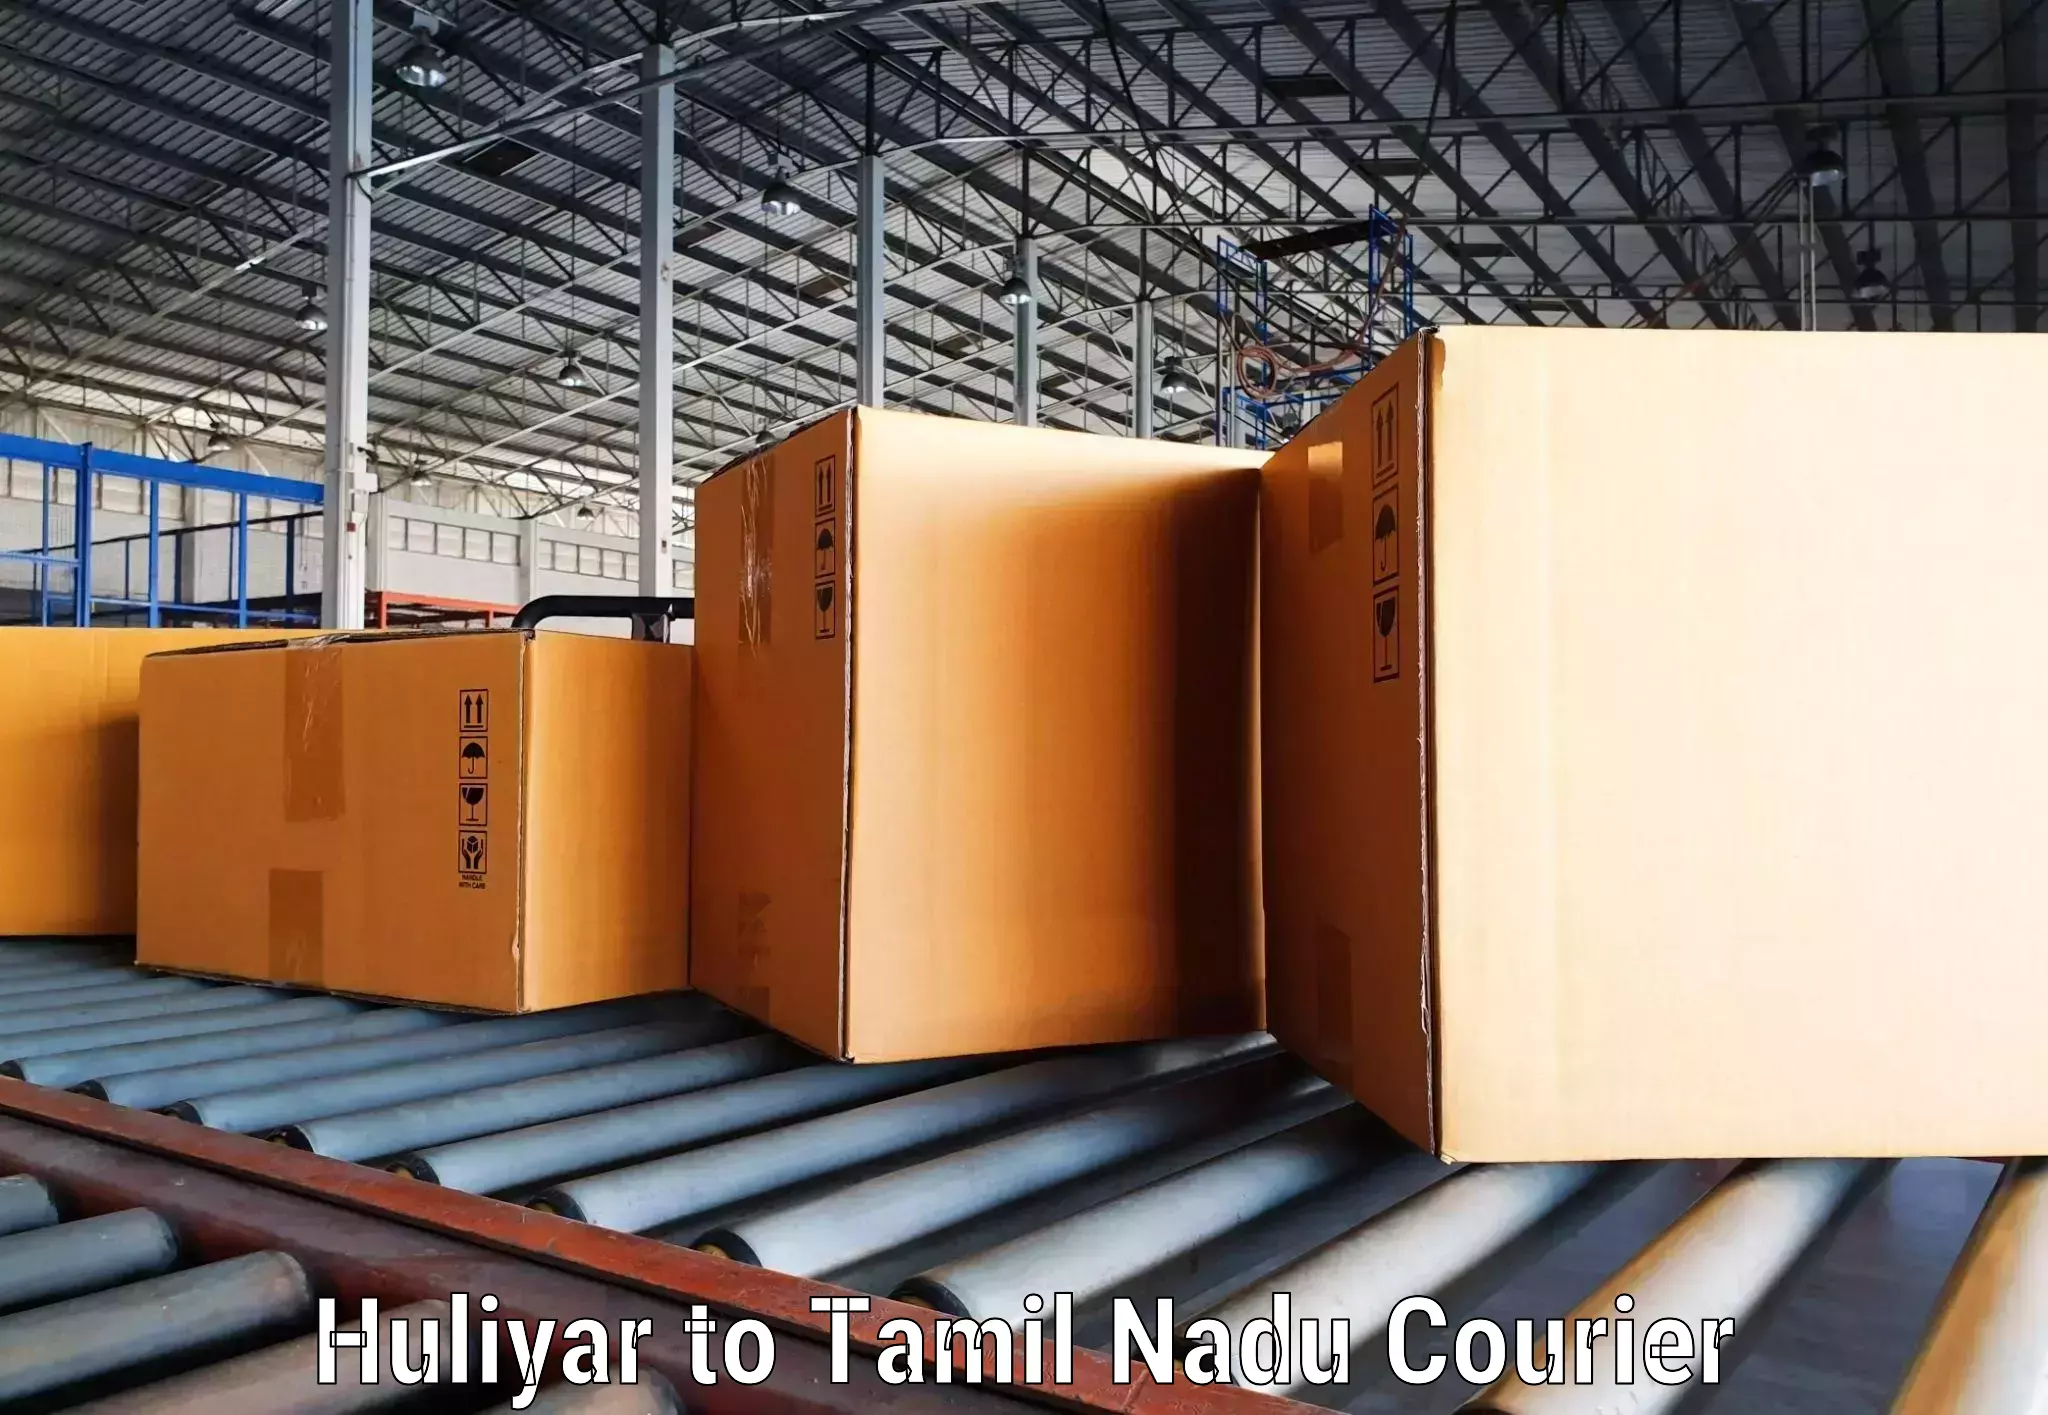 State-of-the-art courier technology Huliyar to Chetpet